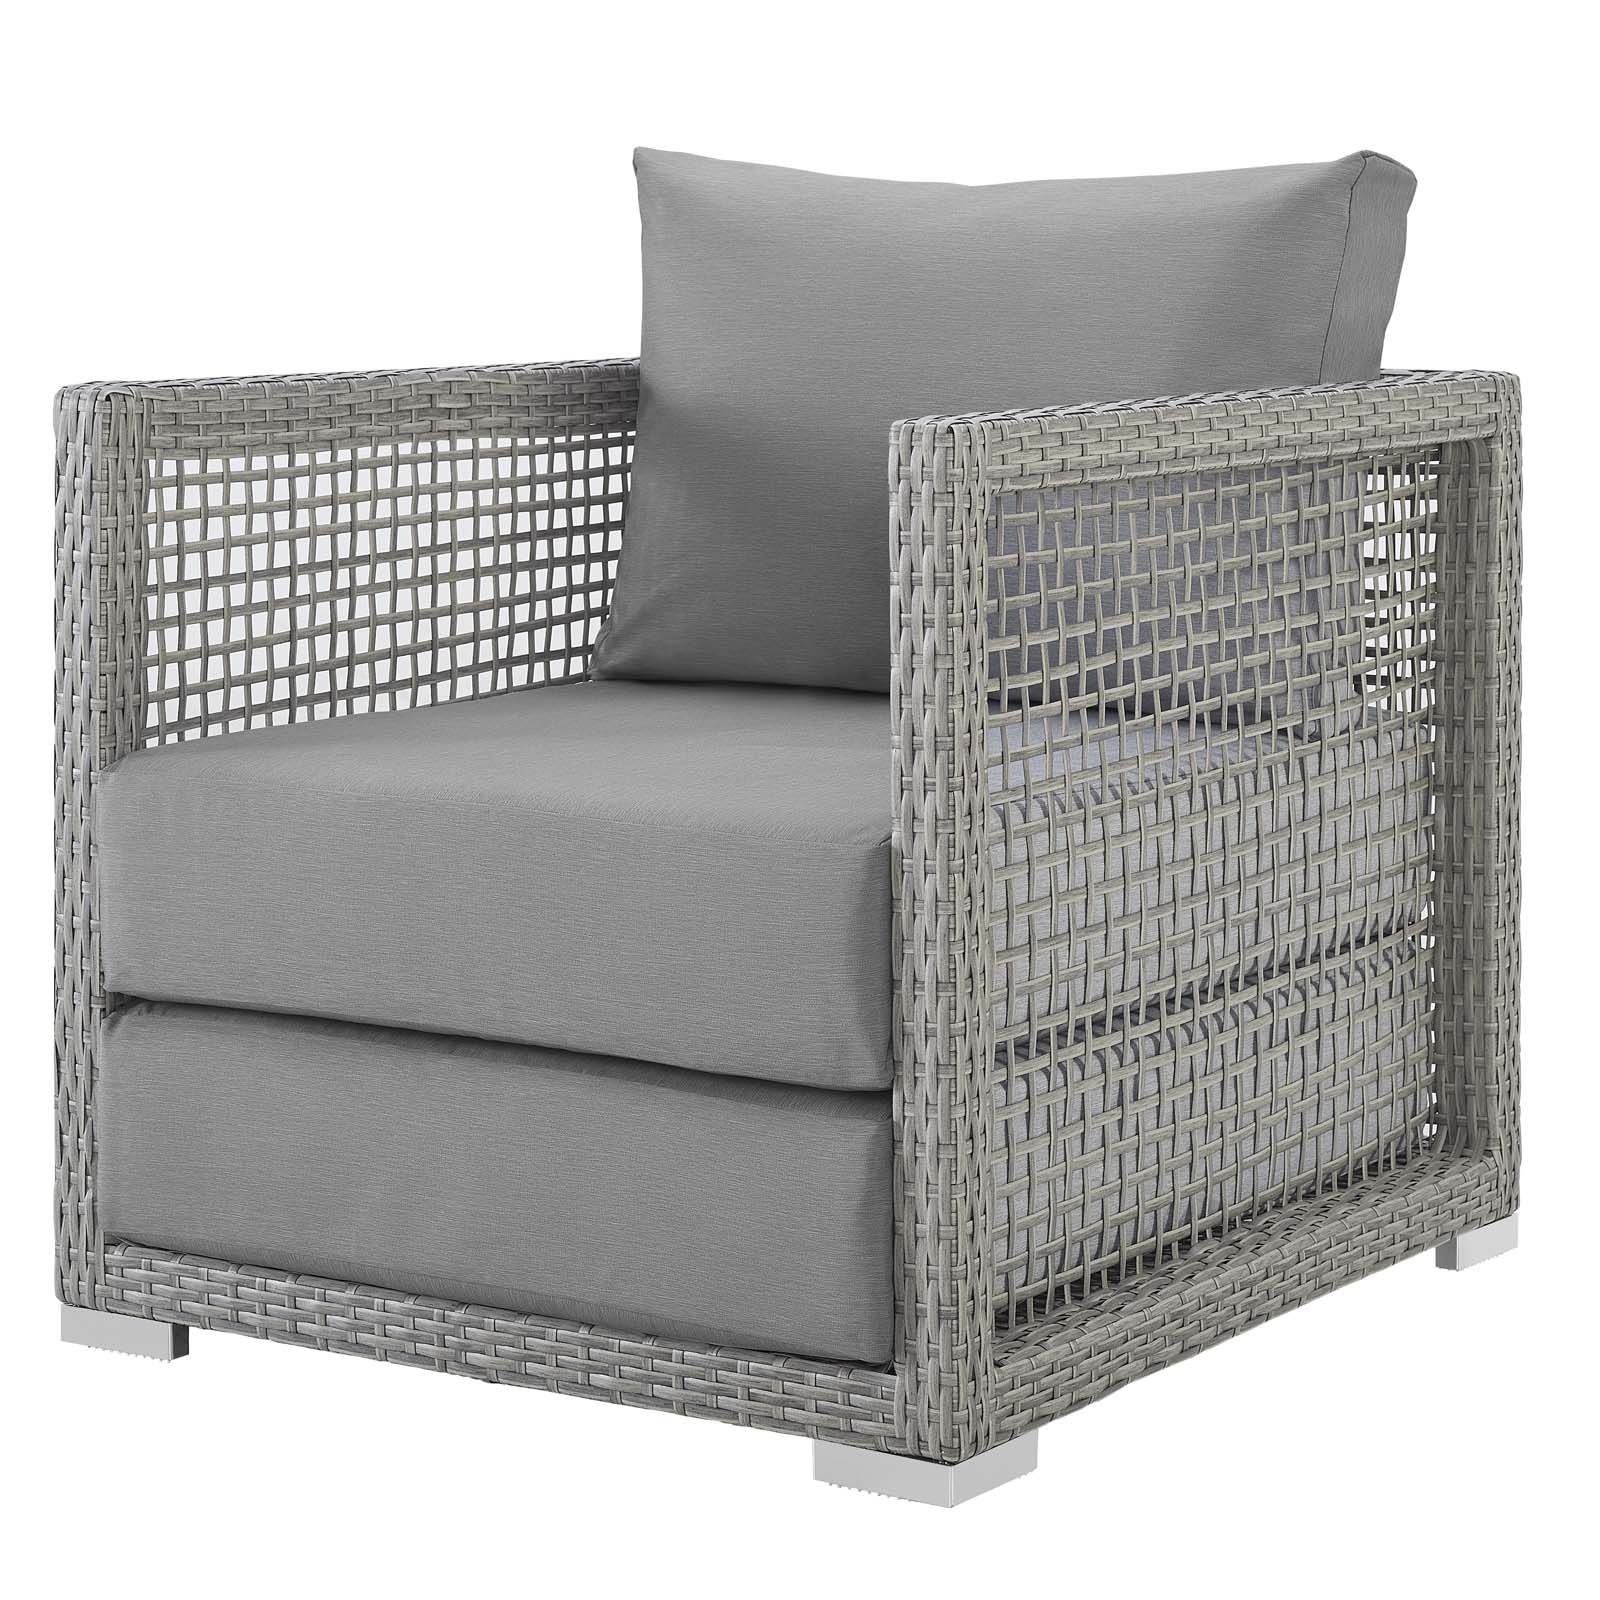 Contemporary Modern Urban Designer Outdoor Patio Balcony Garden Furniture Lounge Chair and Coffee Side Table Set, Rattan Wicker Fabric, Grey Gray - image 5 of 8